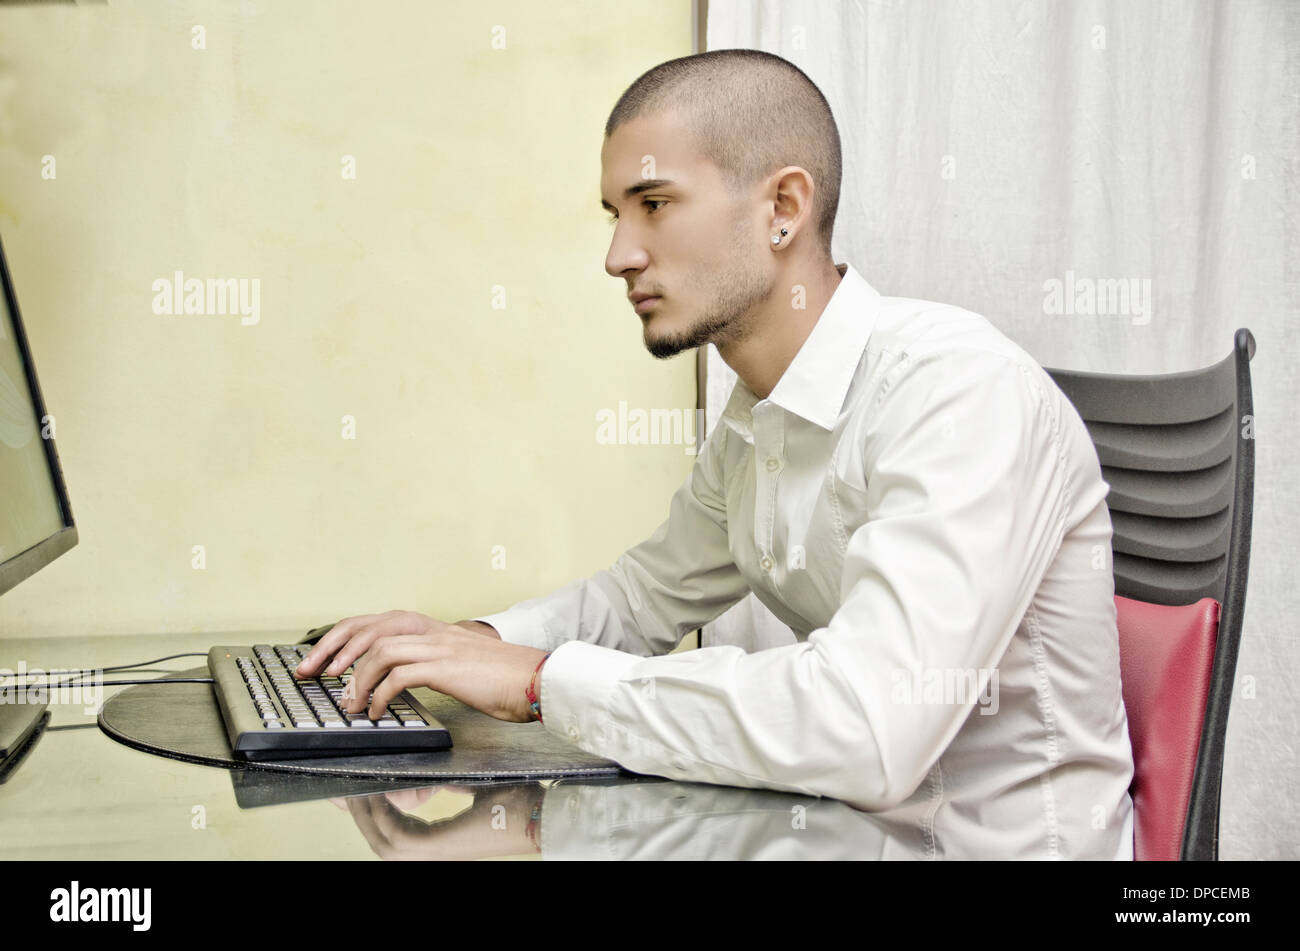 Attractive young man at home sitting at desk, working with computer Stock Photo